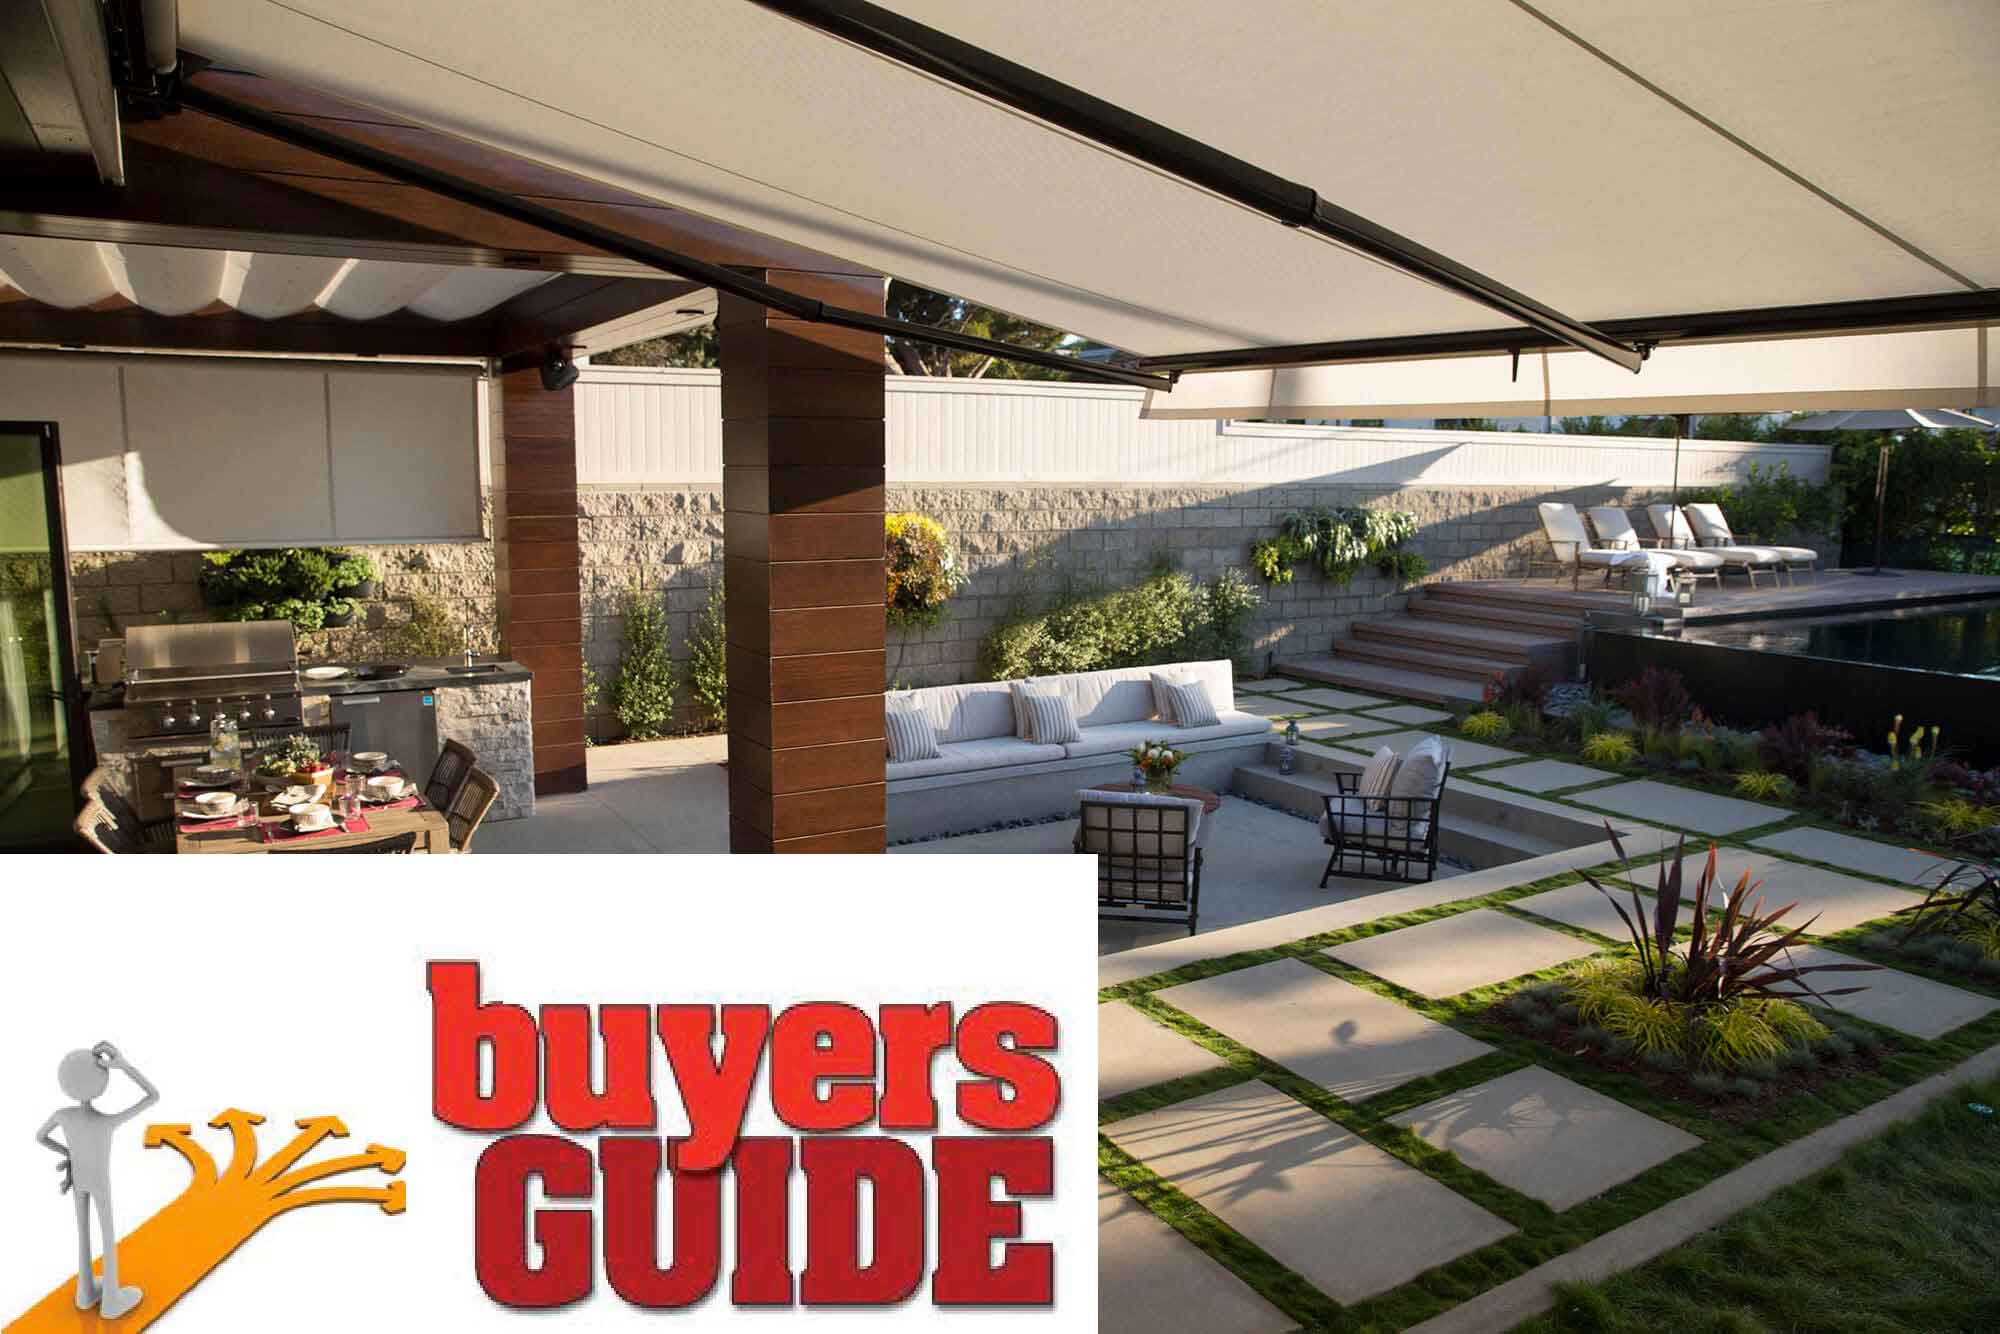 Retractable Awning Prices - Read our Buyers Guide for Retractable Awnings